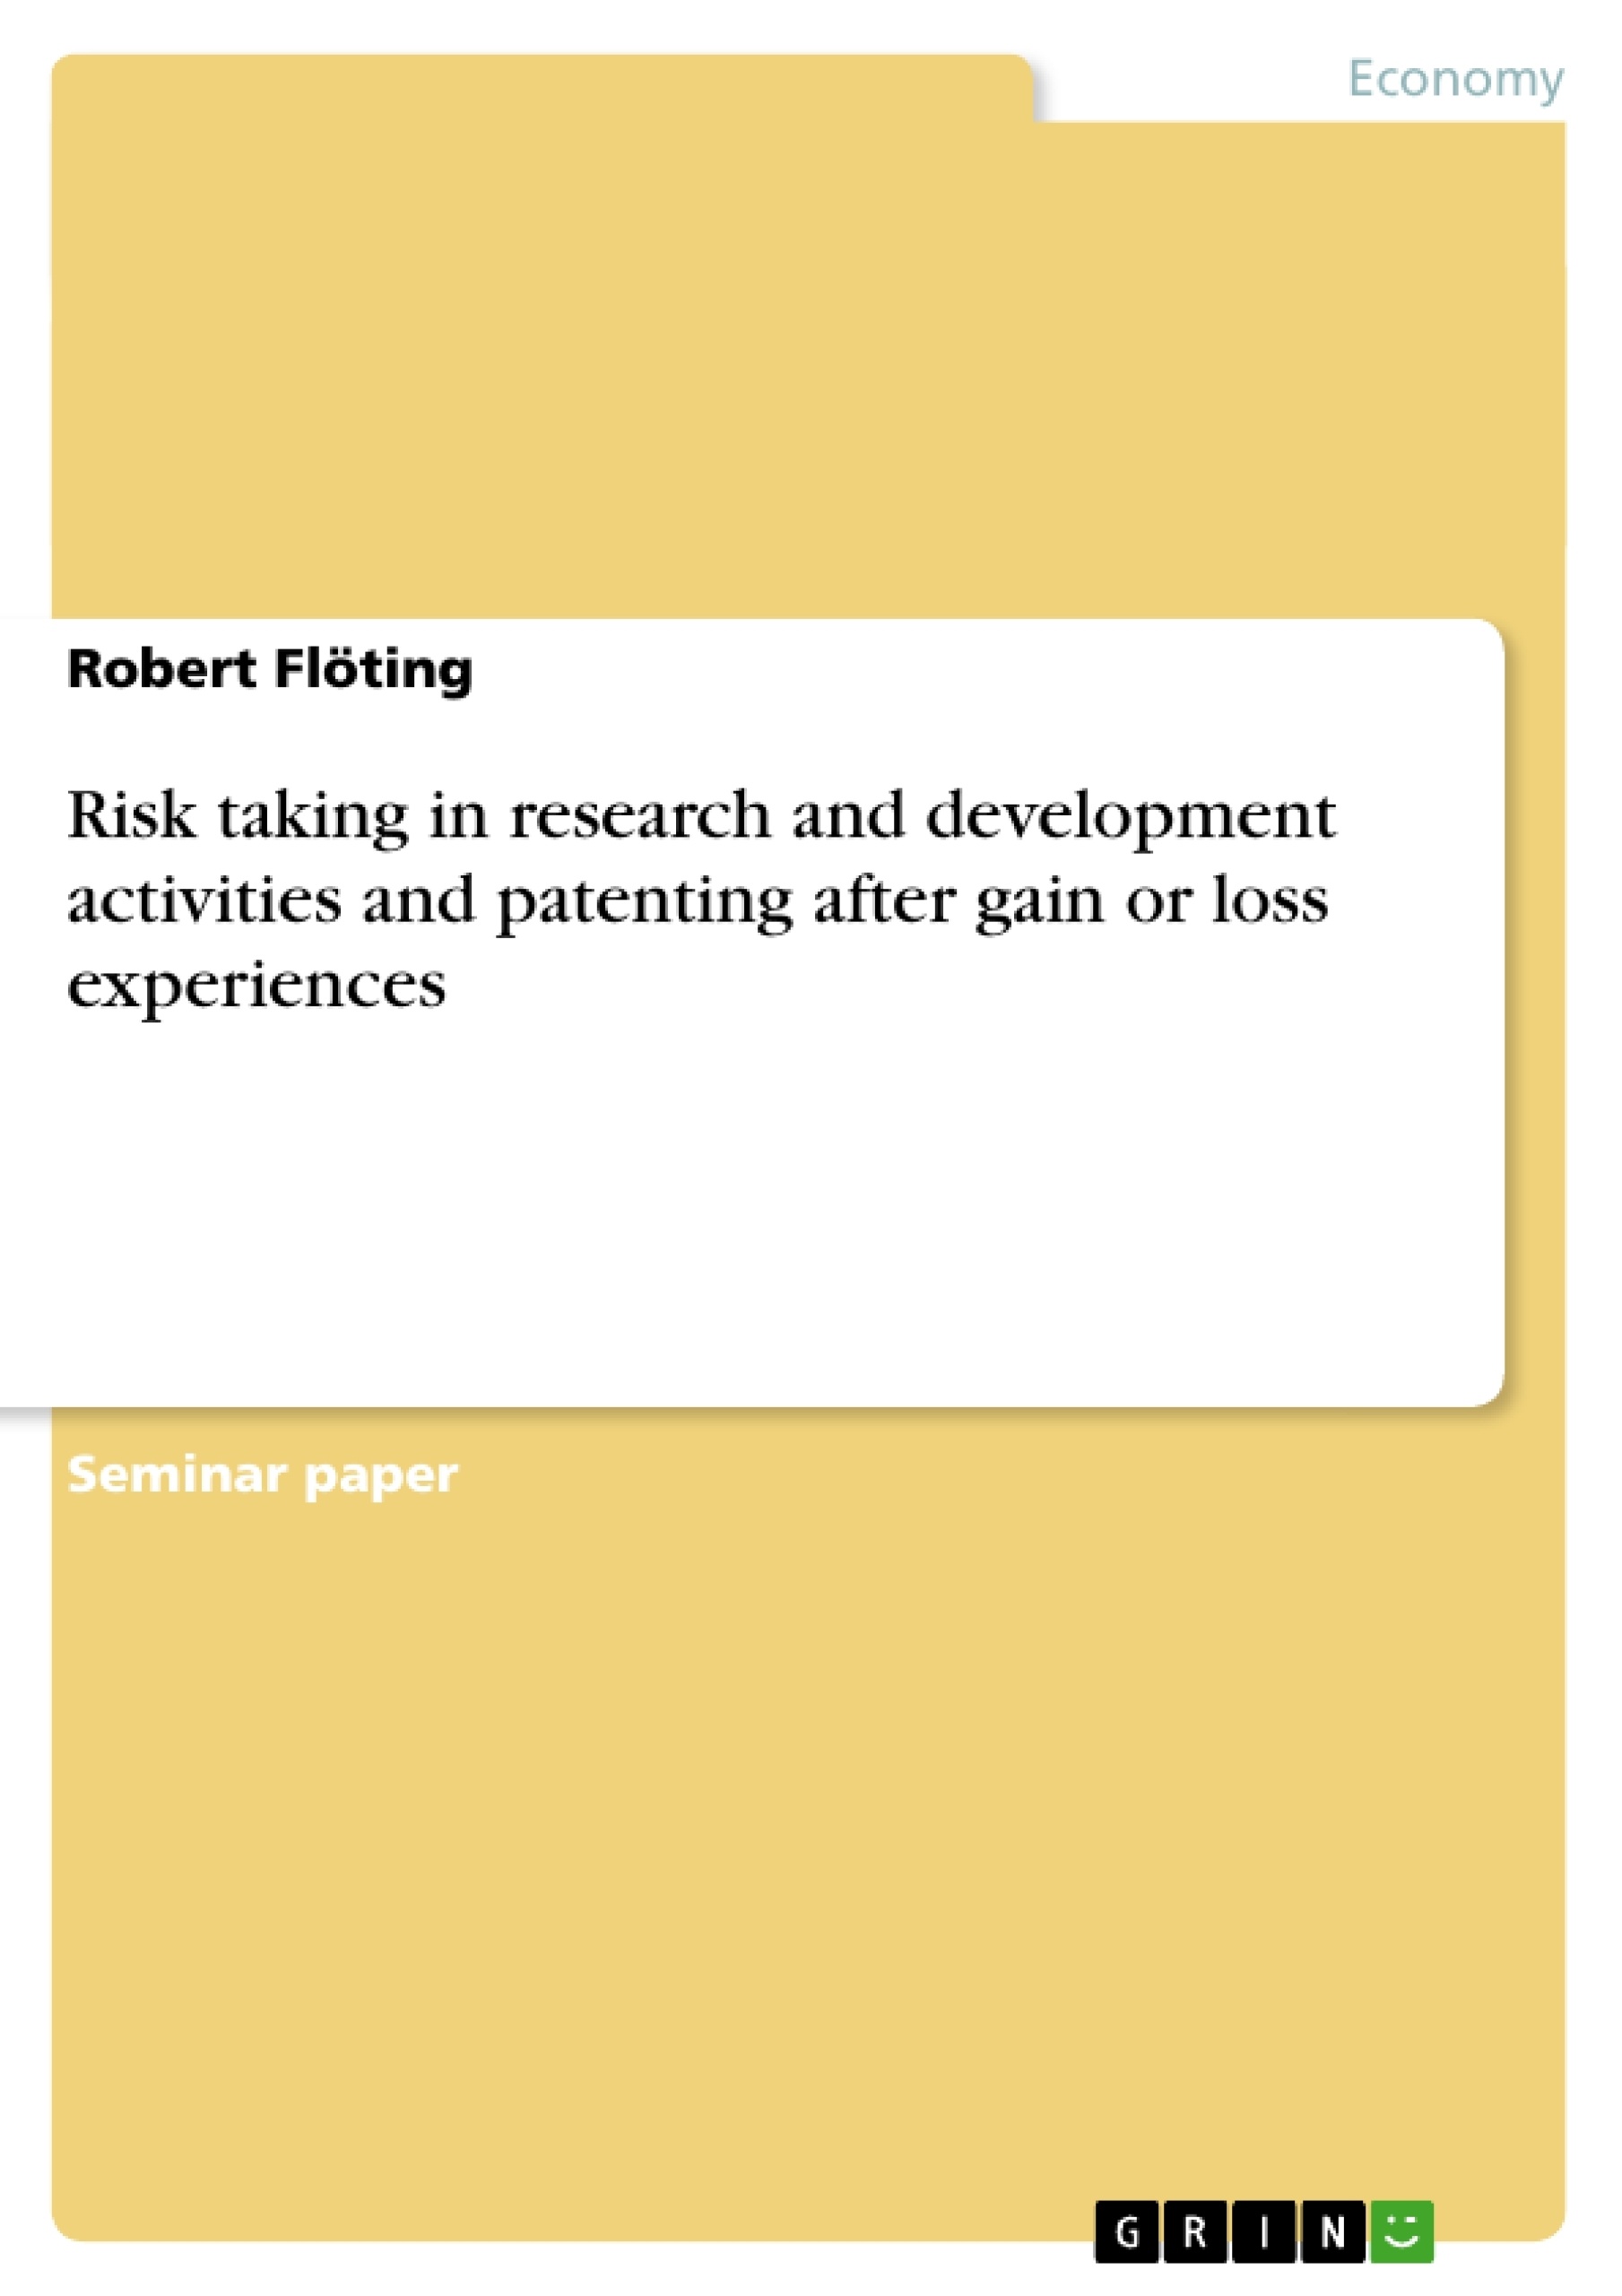 Title: Risk taking in research and development activities and patenting after gain or loss experiences